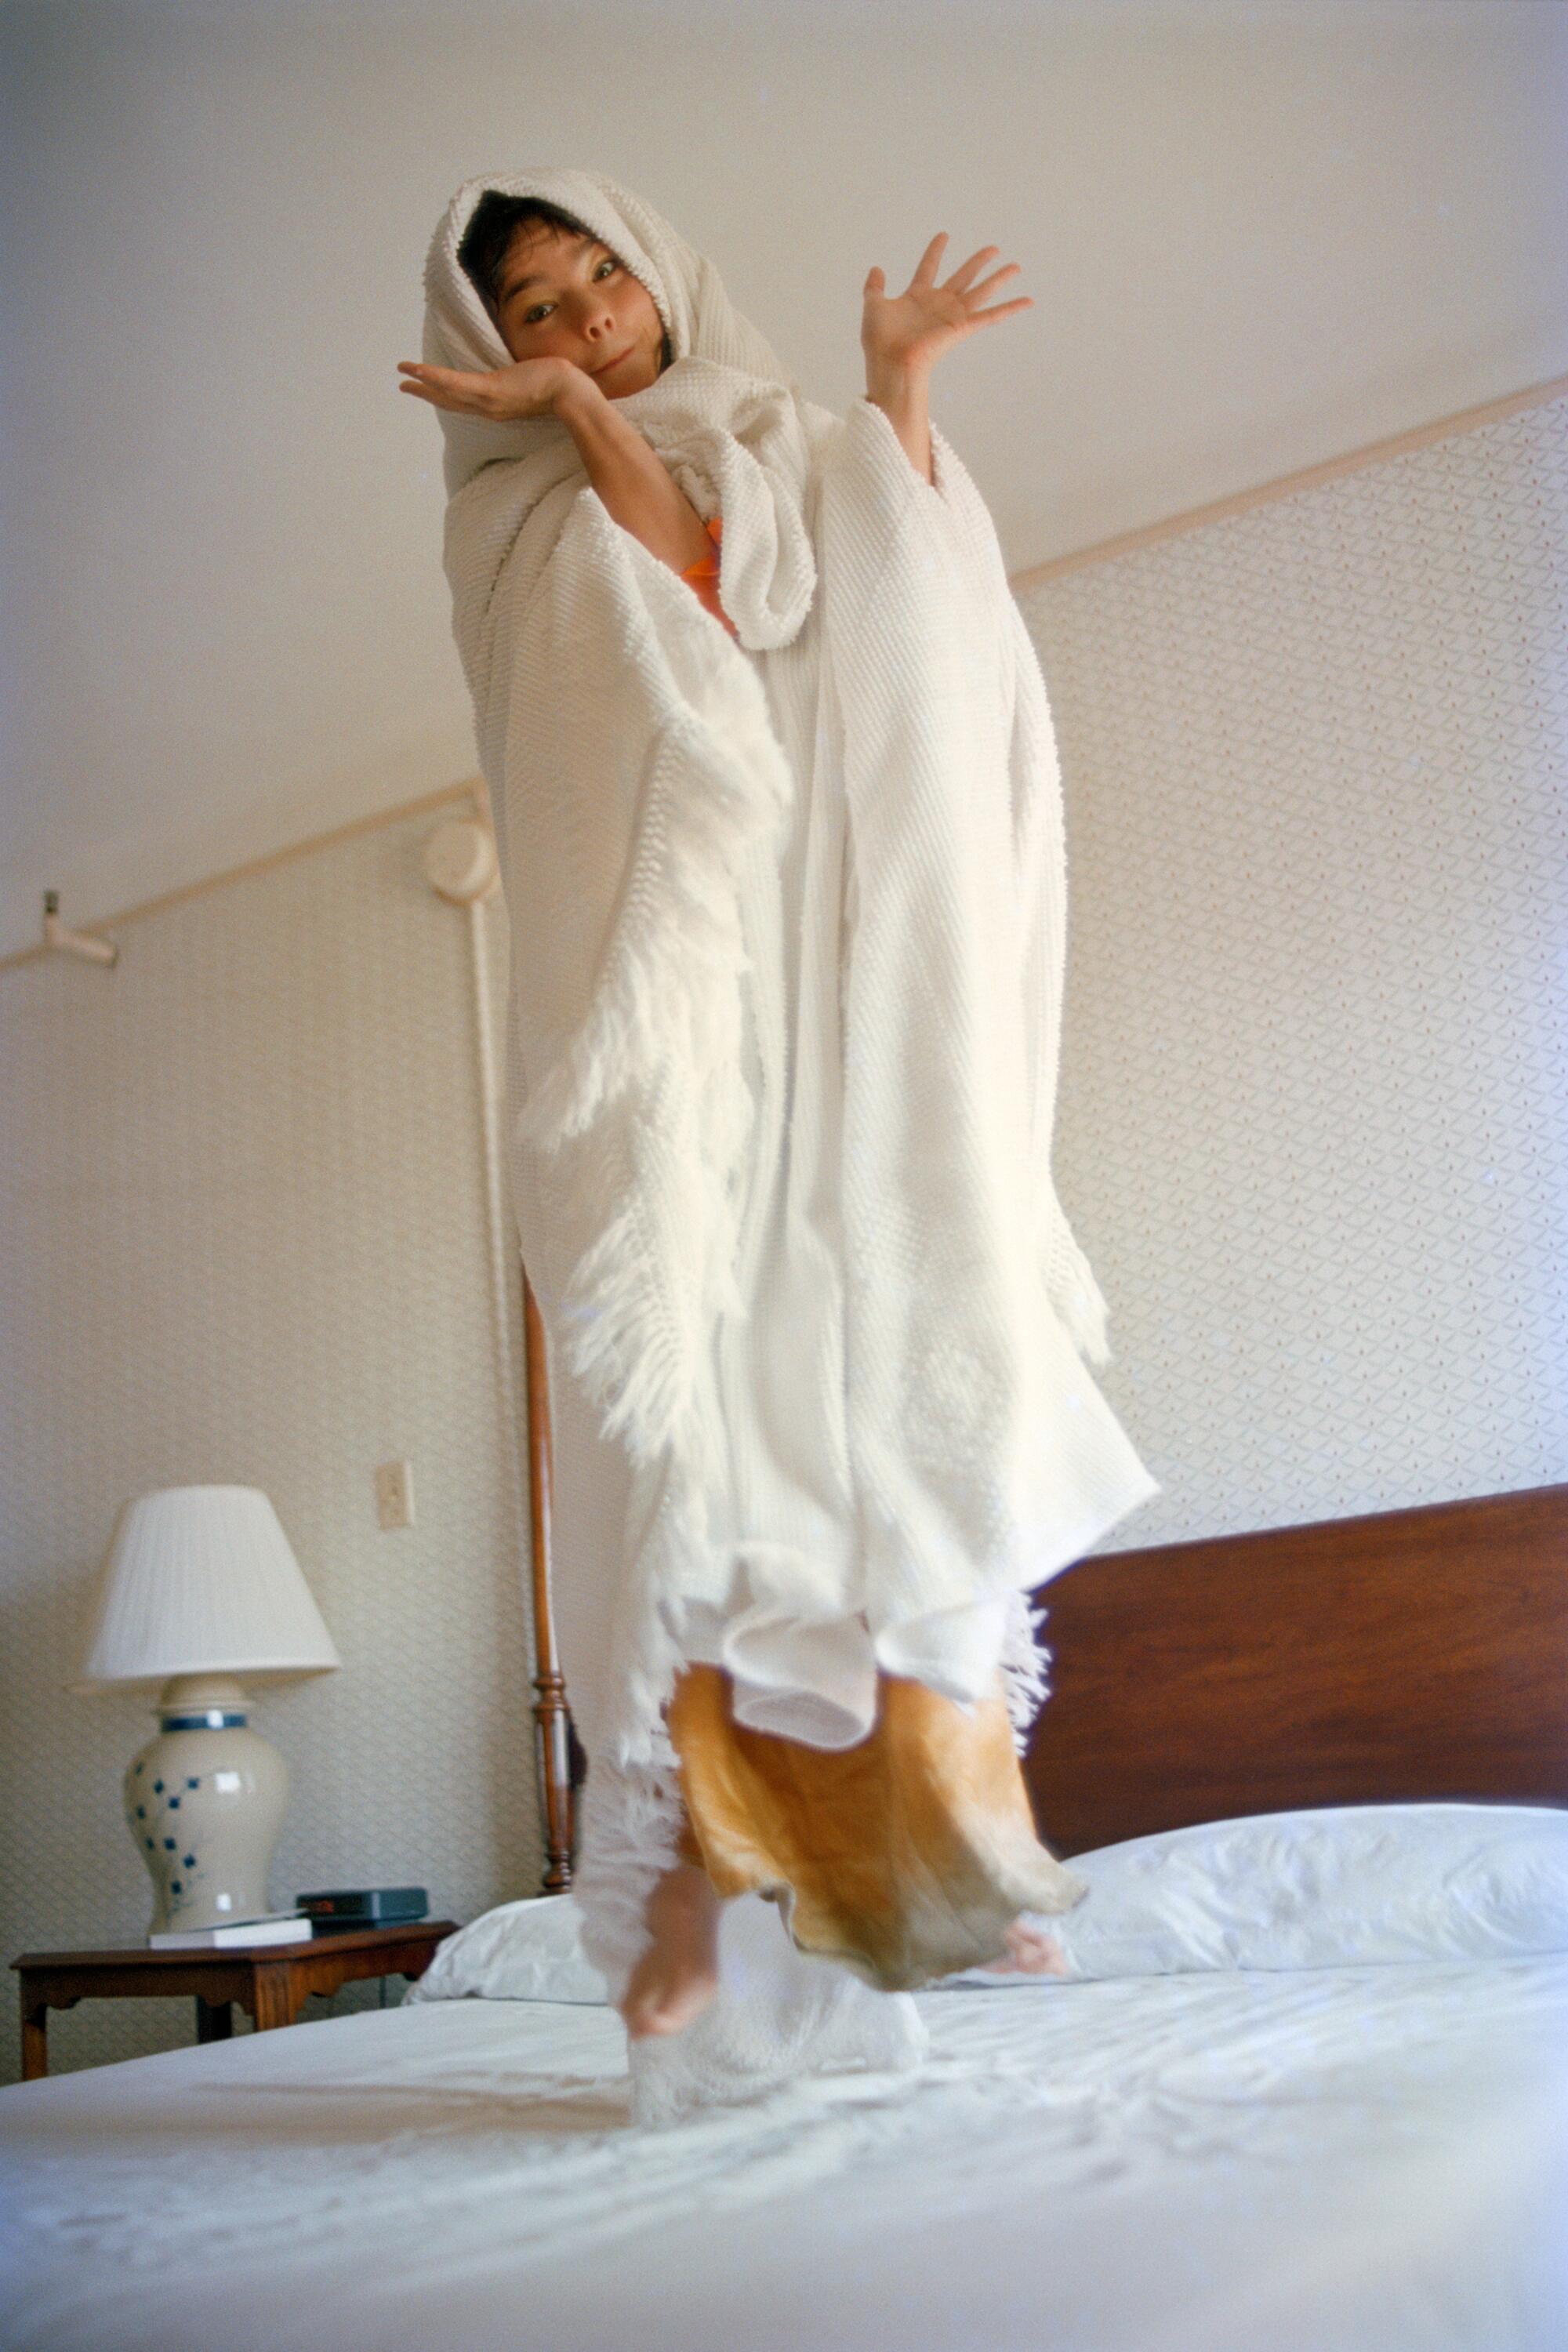 Bj?rk jumps on a bed, wrapped in a white sheet, making a playful face.